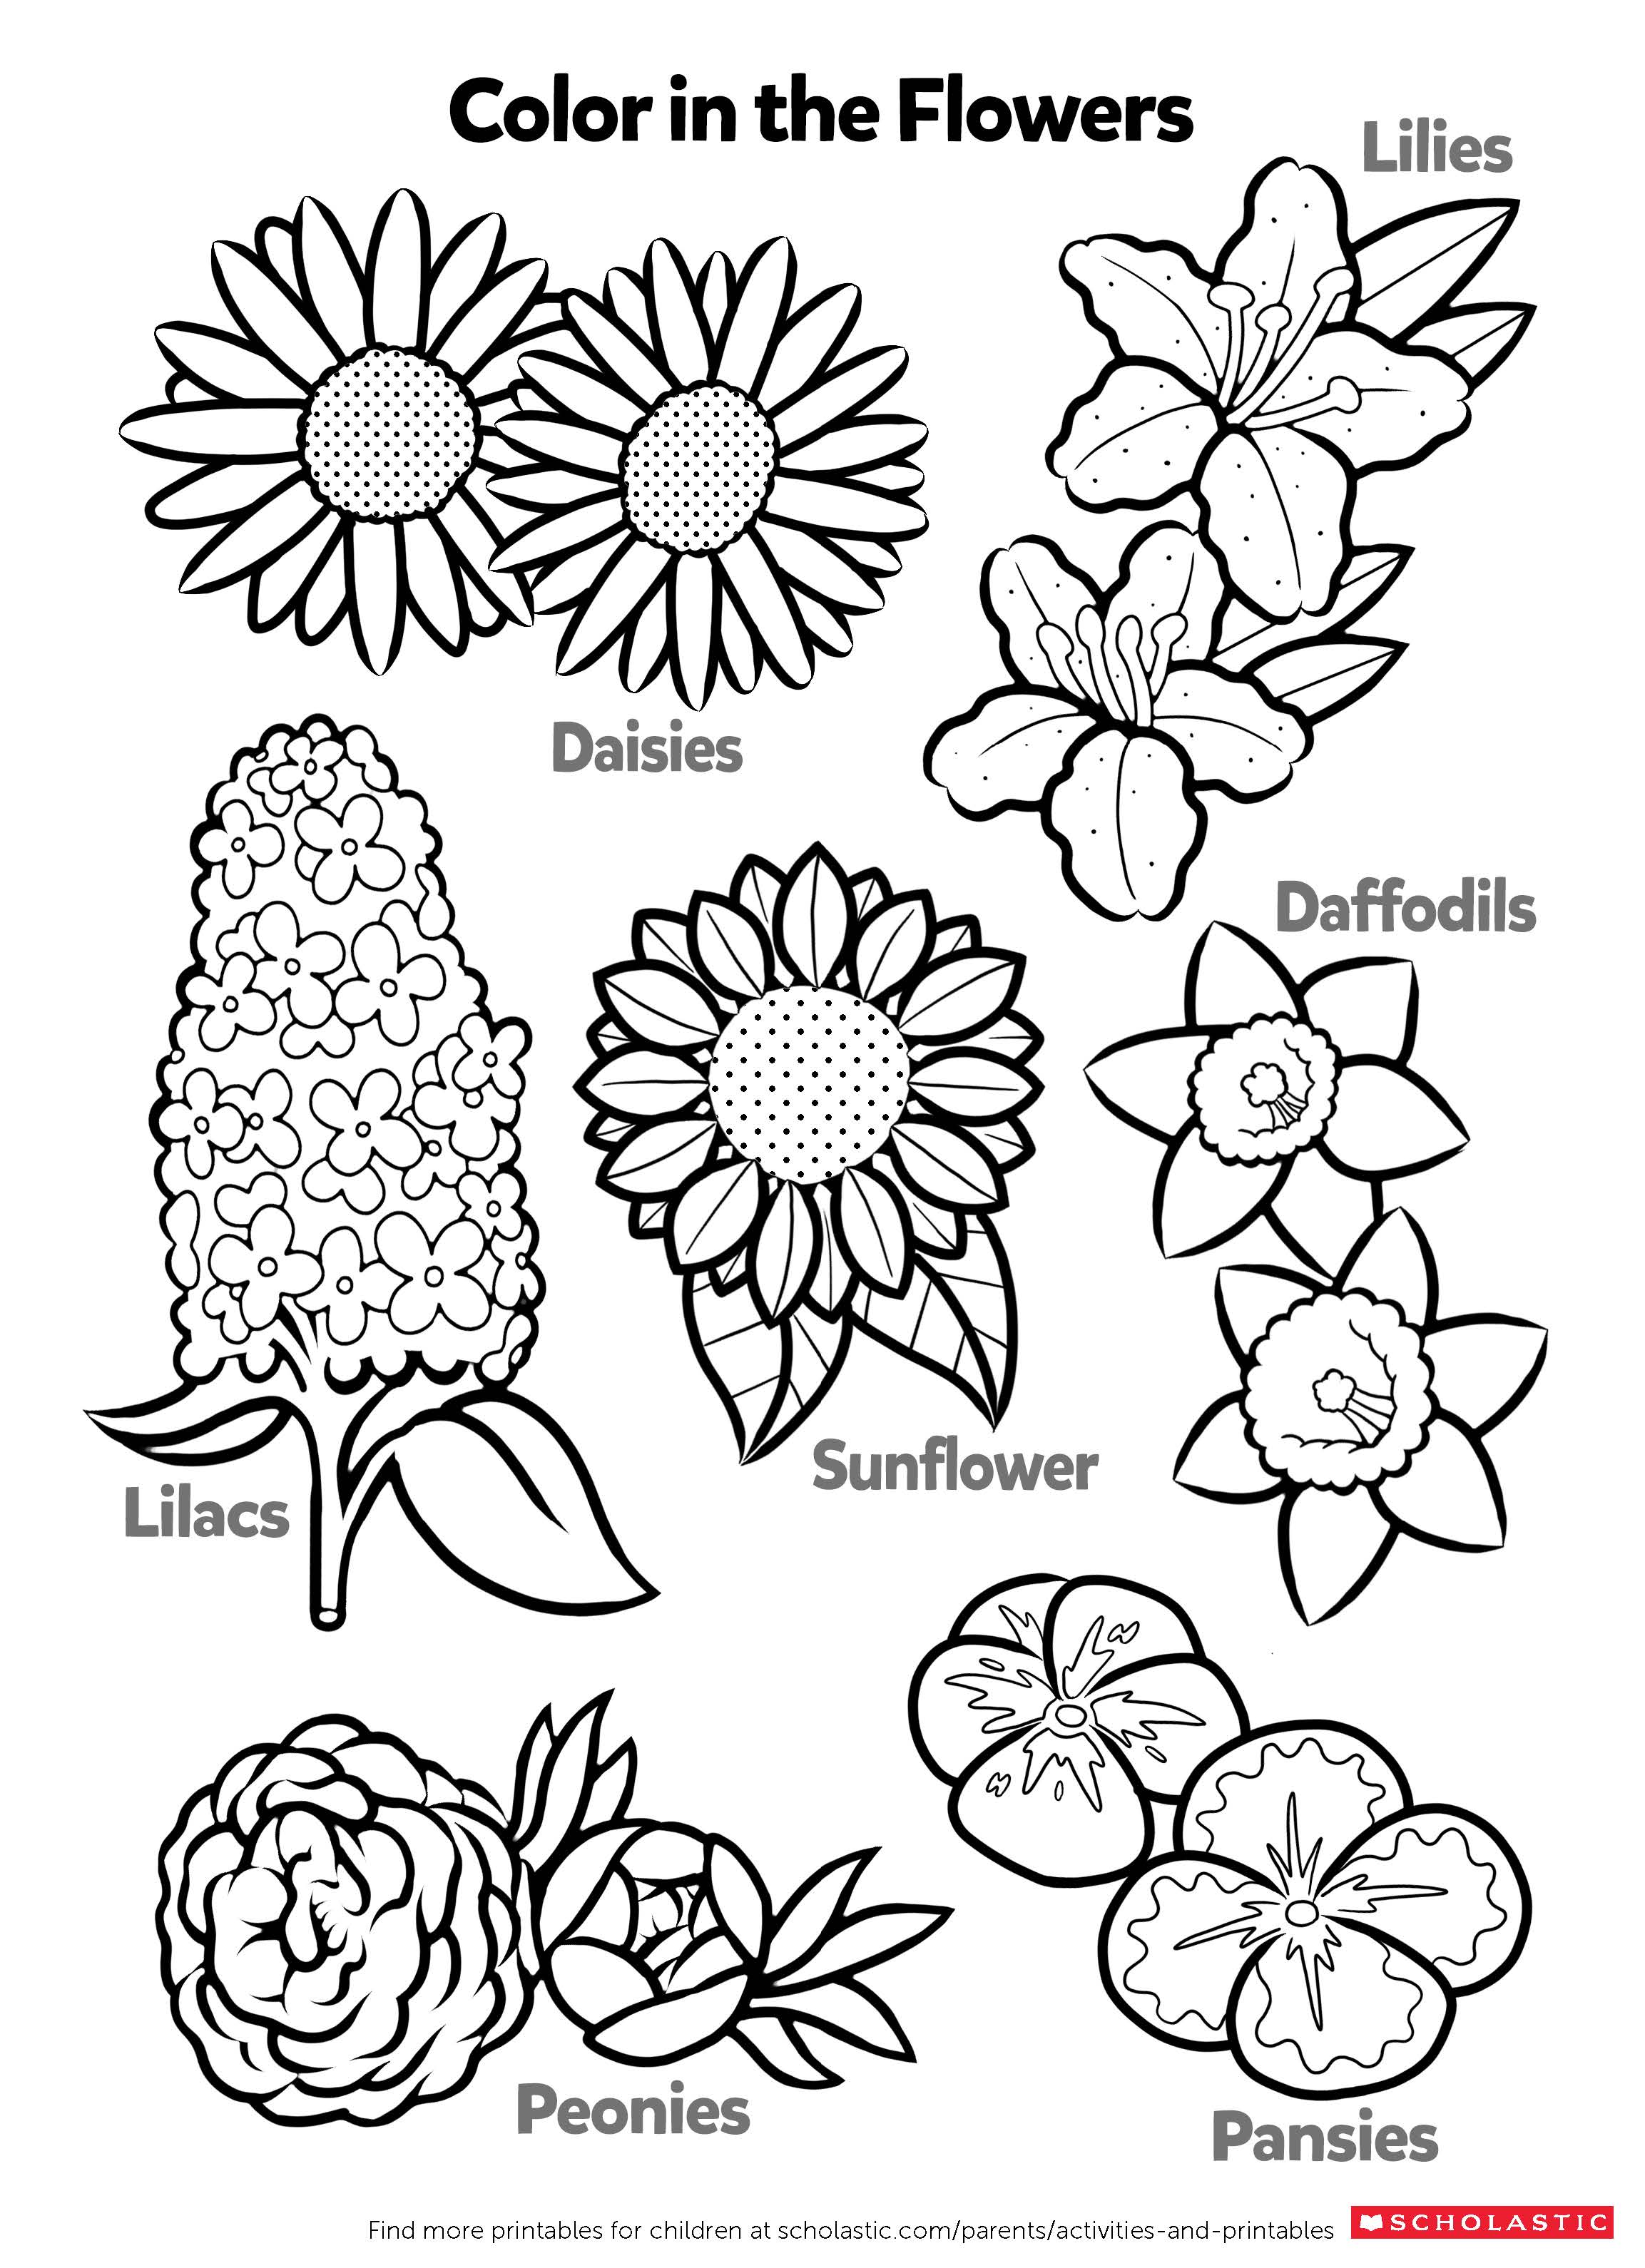 Learn About Flowers By Coloring | Worksheets & Printables | Scholastic | Parents